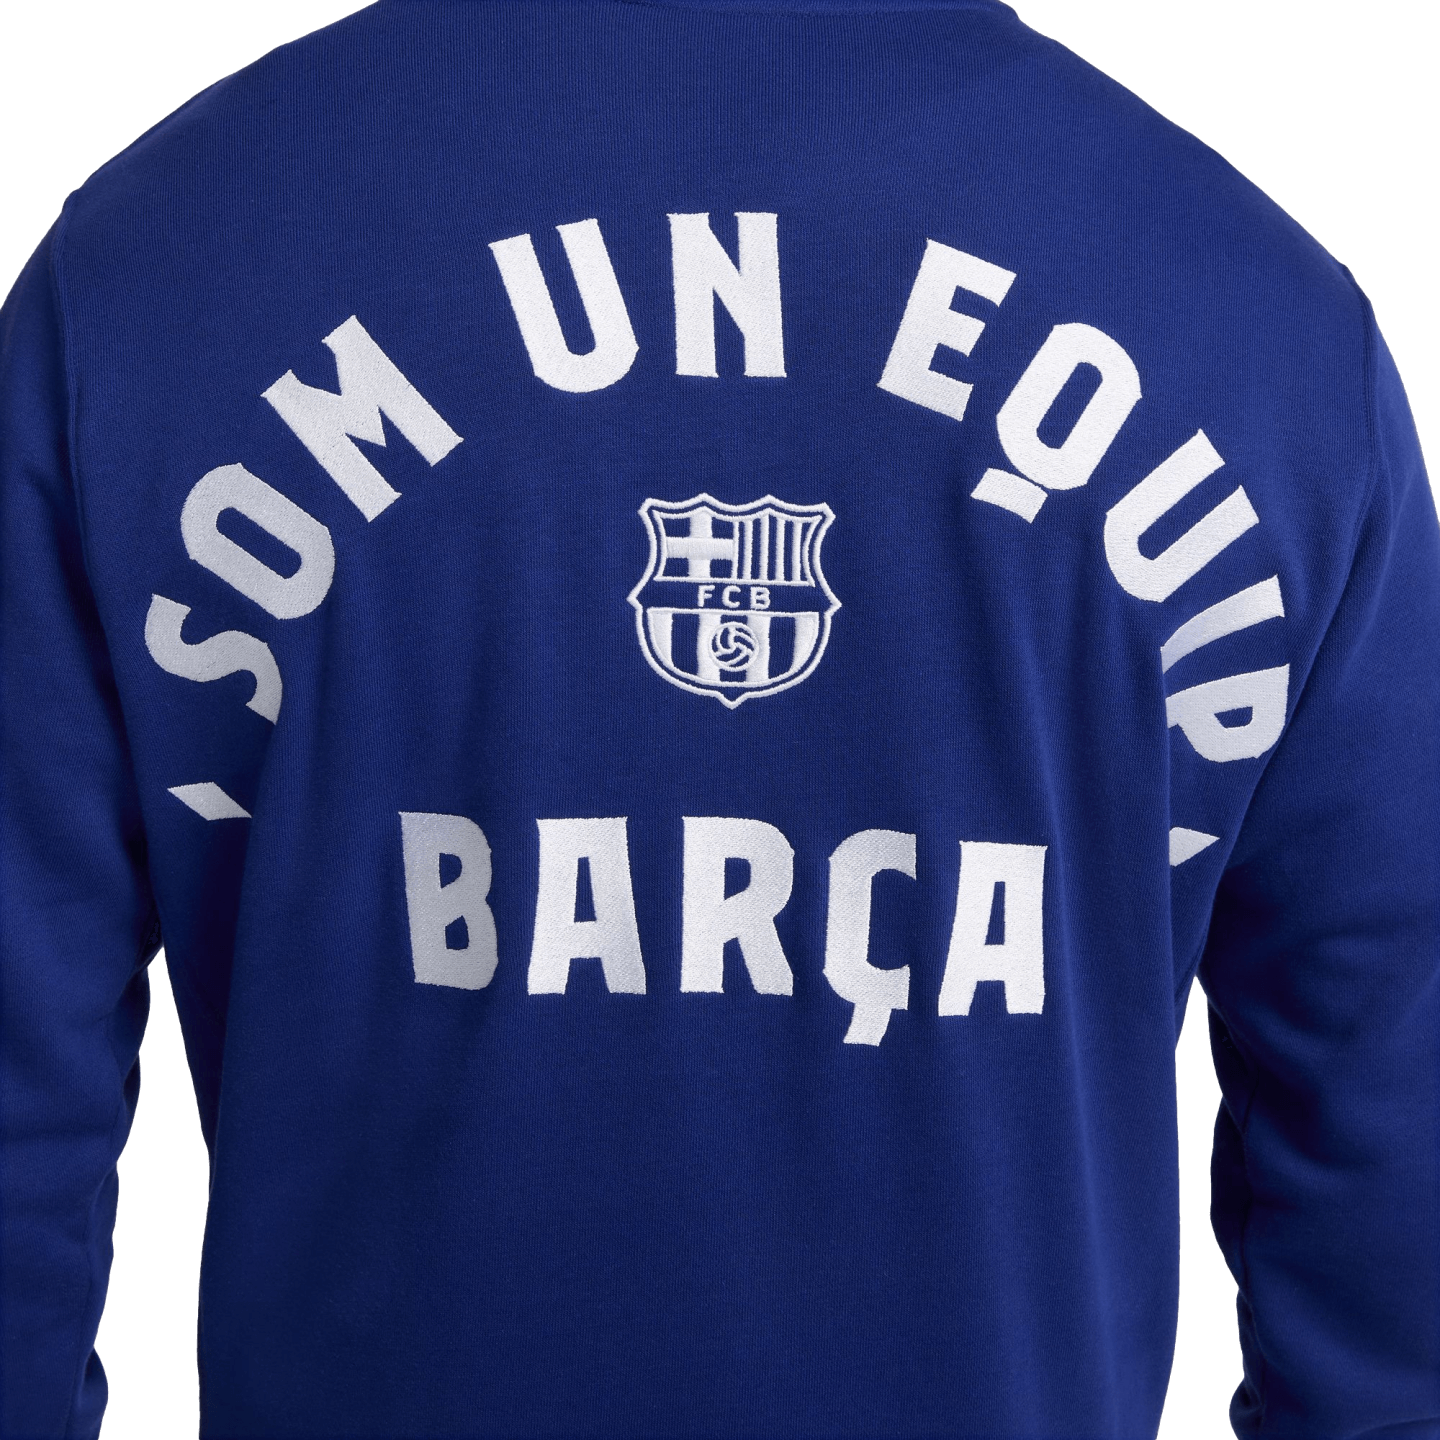 Nike Barcelona Club Fleece French Terry Pullover Hoodie